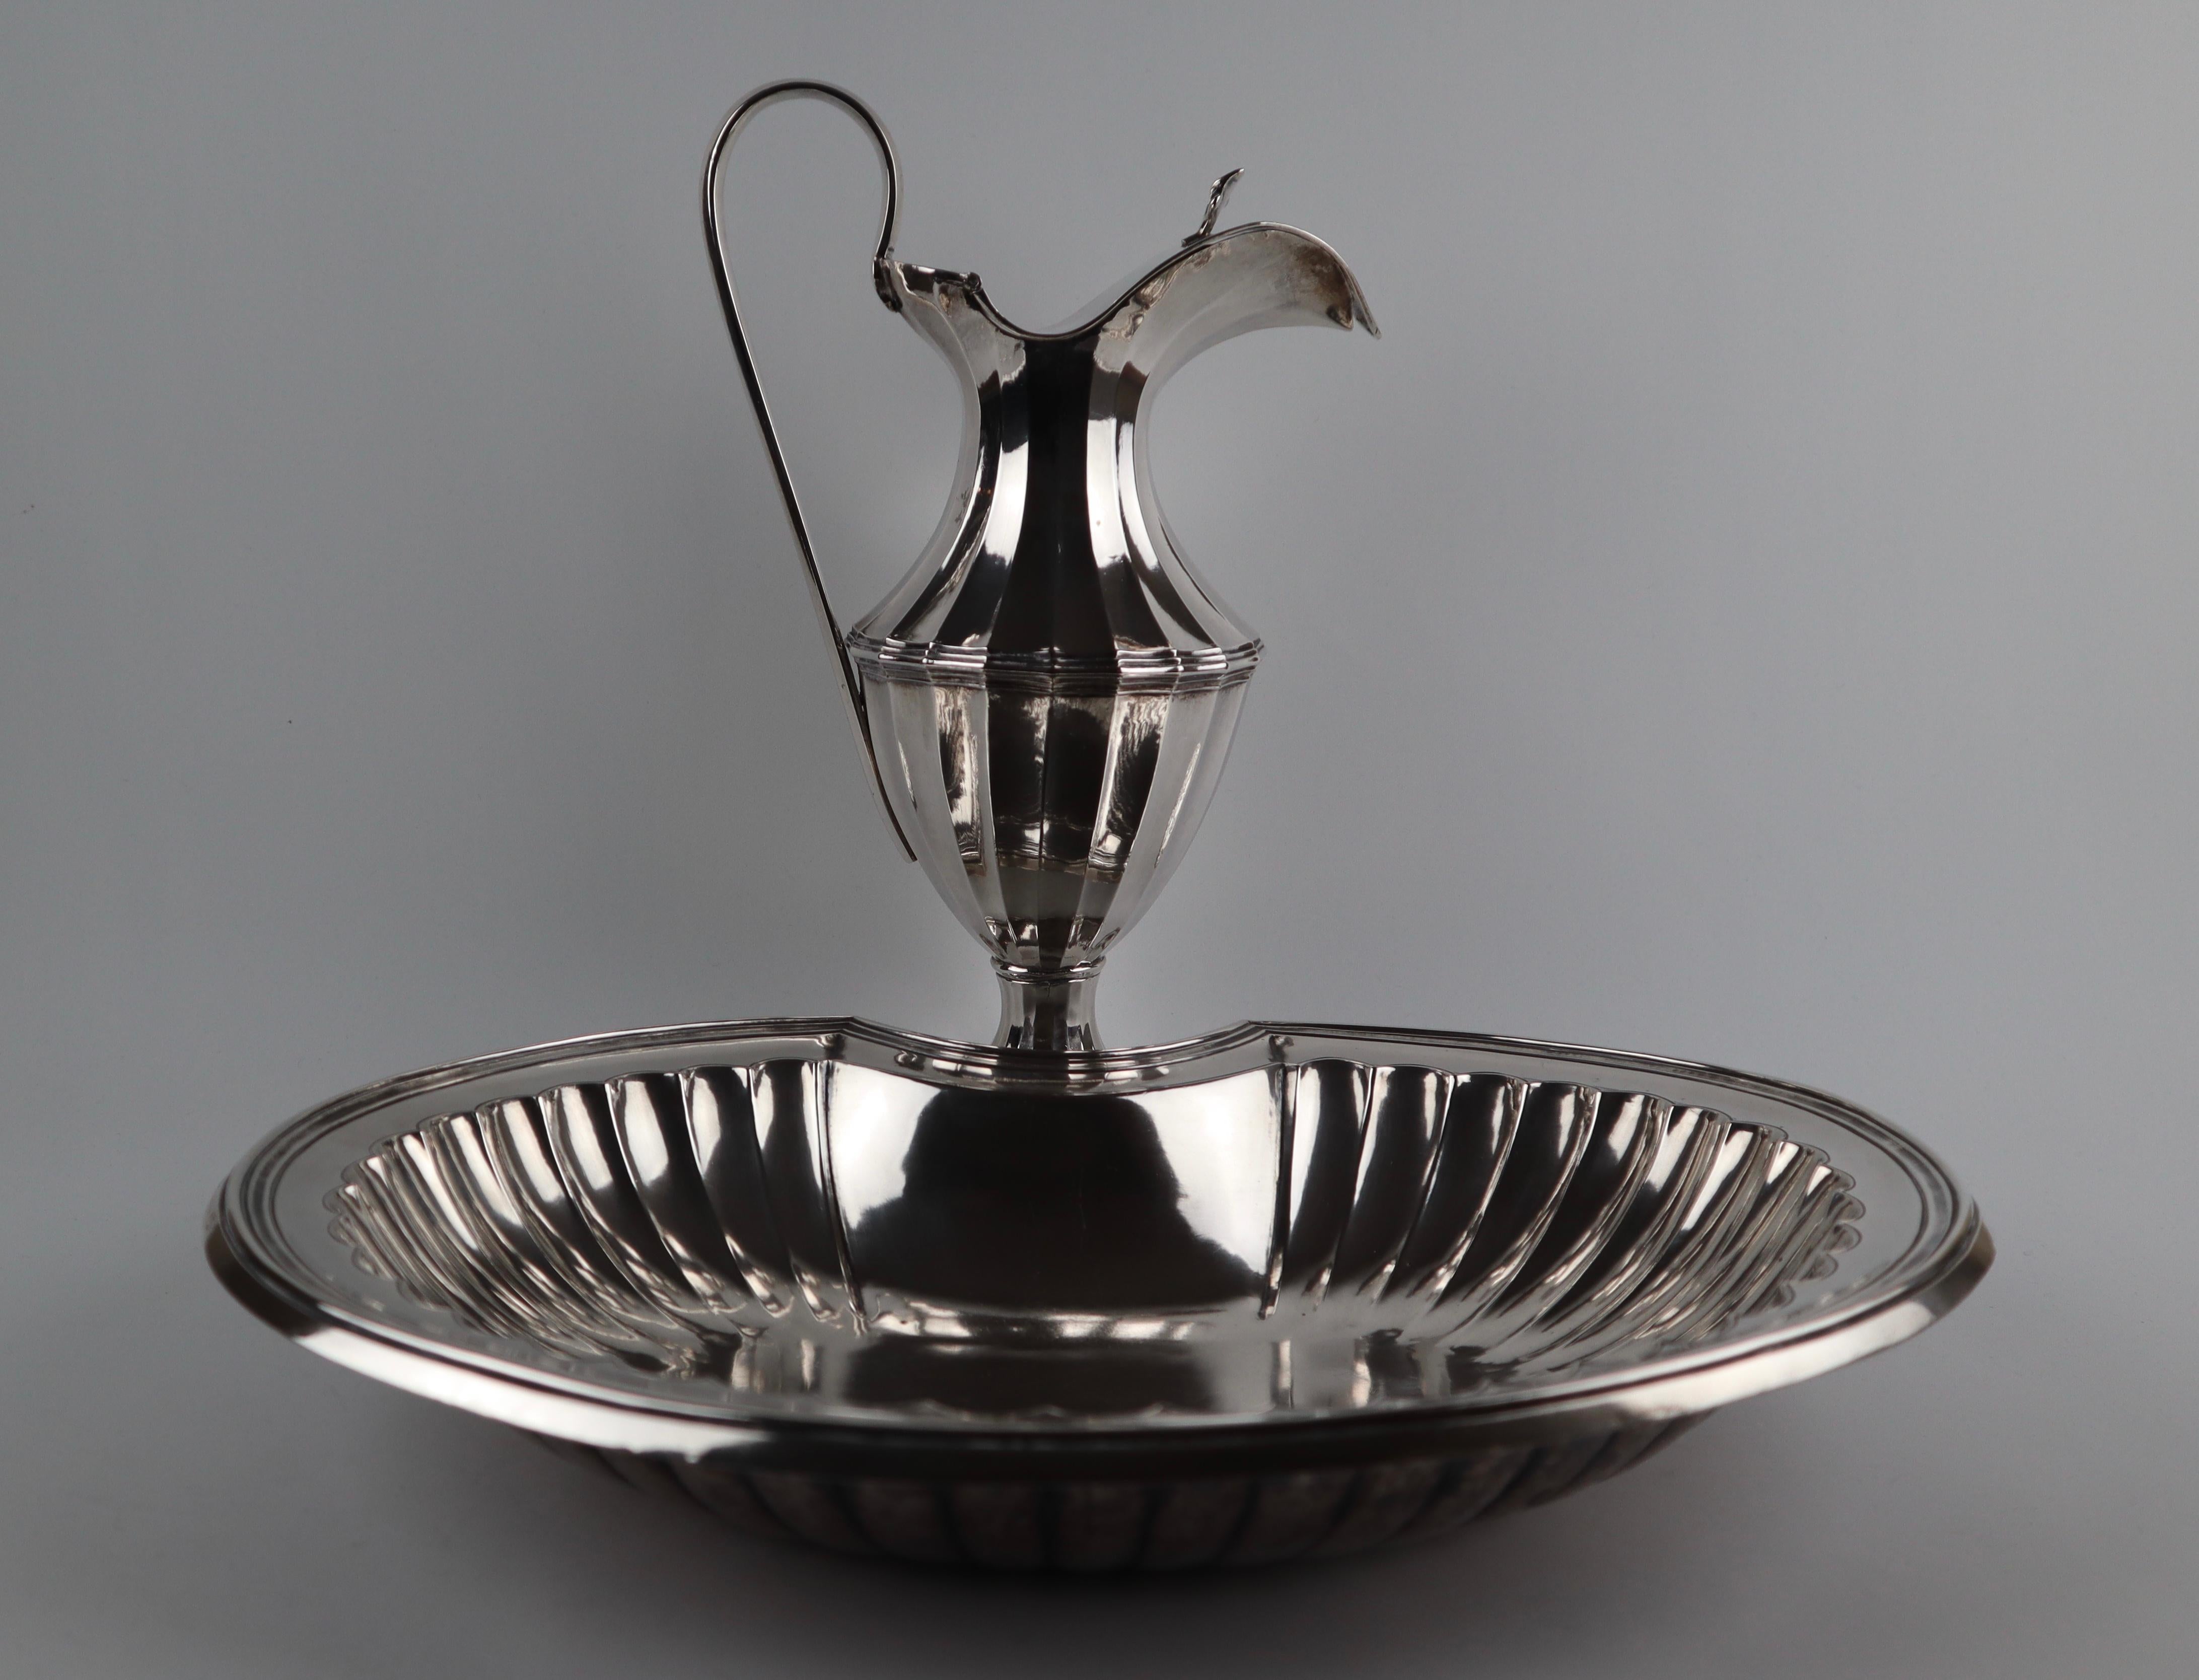 A magnificent 18th century antique hammered silver shaving bowl and jug with hinged lid.
Both bowl and jug have gadroon detailing to the main body.


Hallmarked for Porto, Portugal 1799
Makers mark AMR for António Moreira da